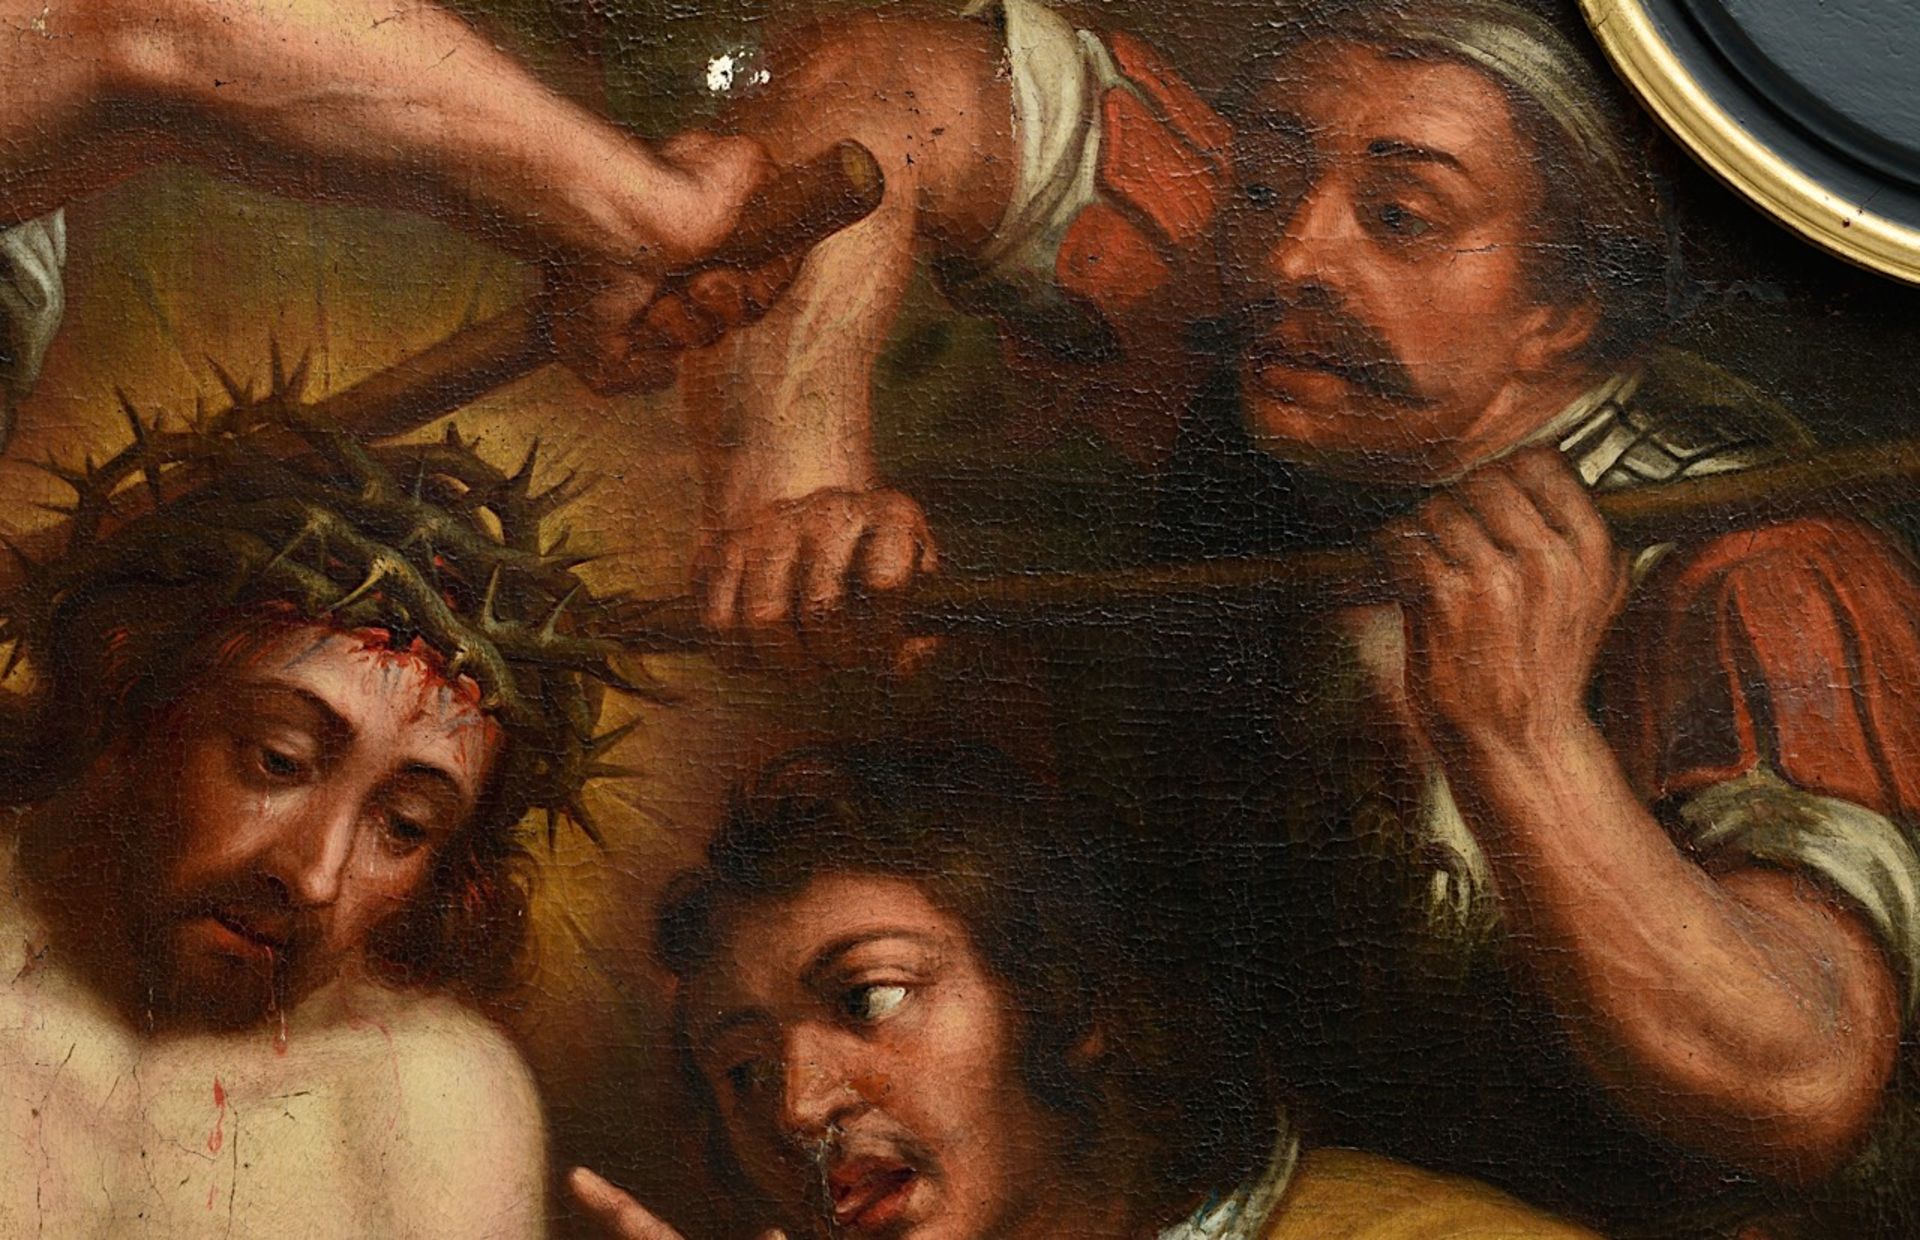 The Crowning with Thorns, 17thC, the Low Countries, oil on canvas, 112 x 112 cm. (44.0 x 44.0 in.), - Image 5 of 8